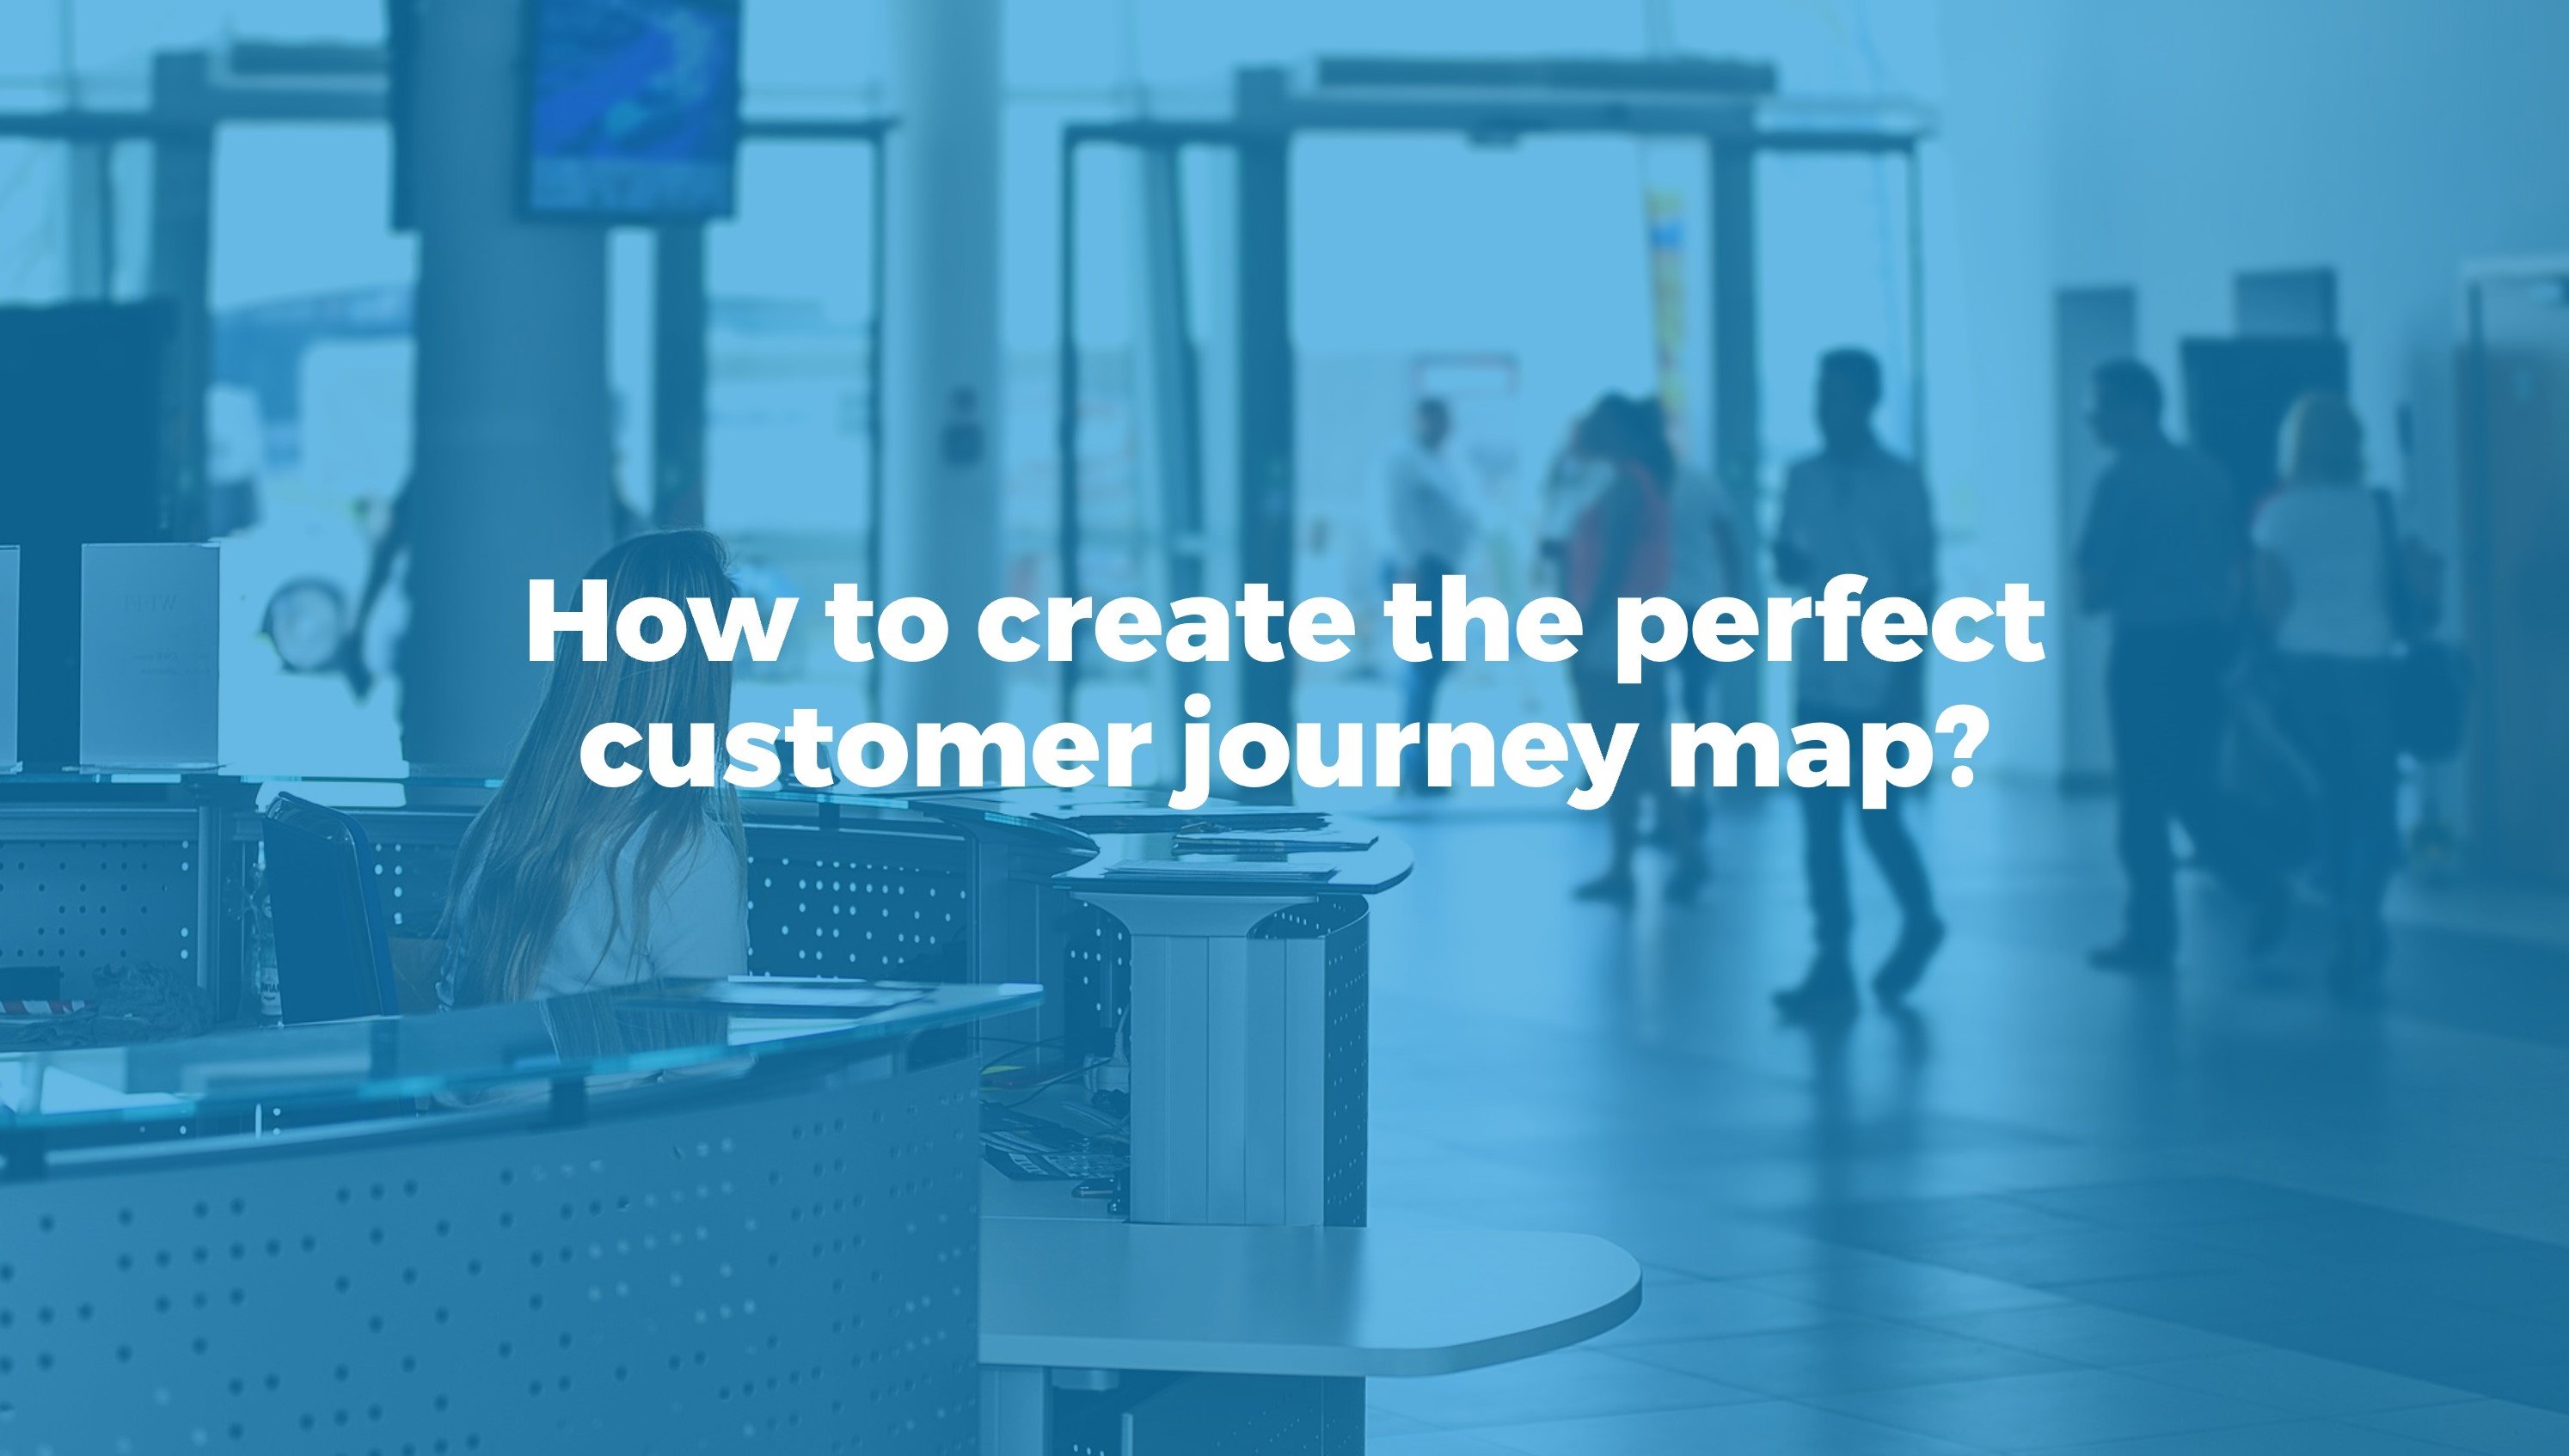 5 Tips on how to develop an effective journey map